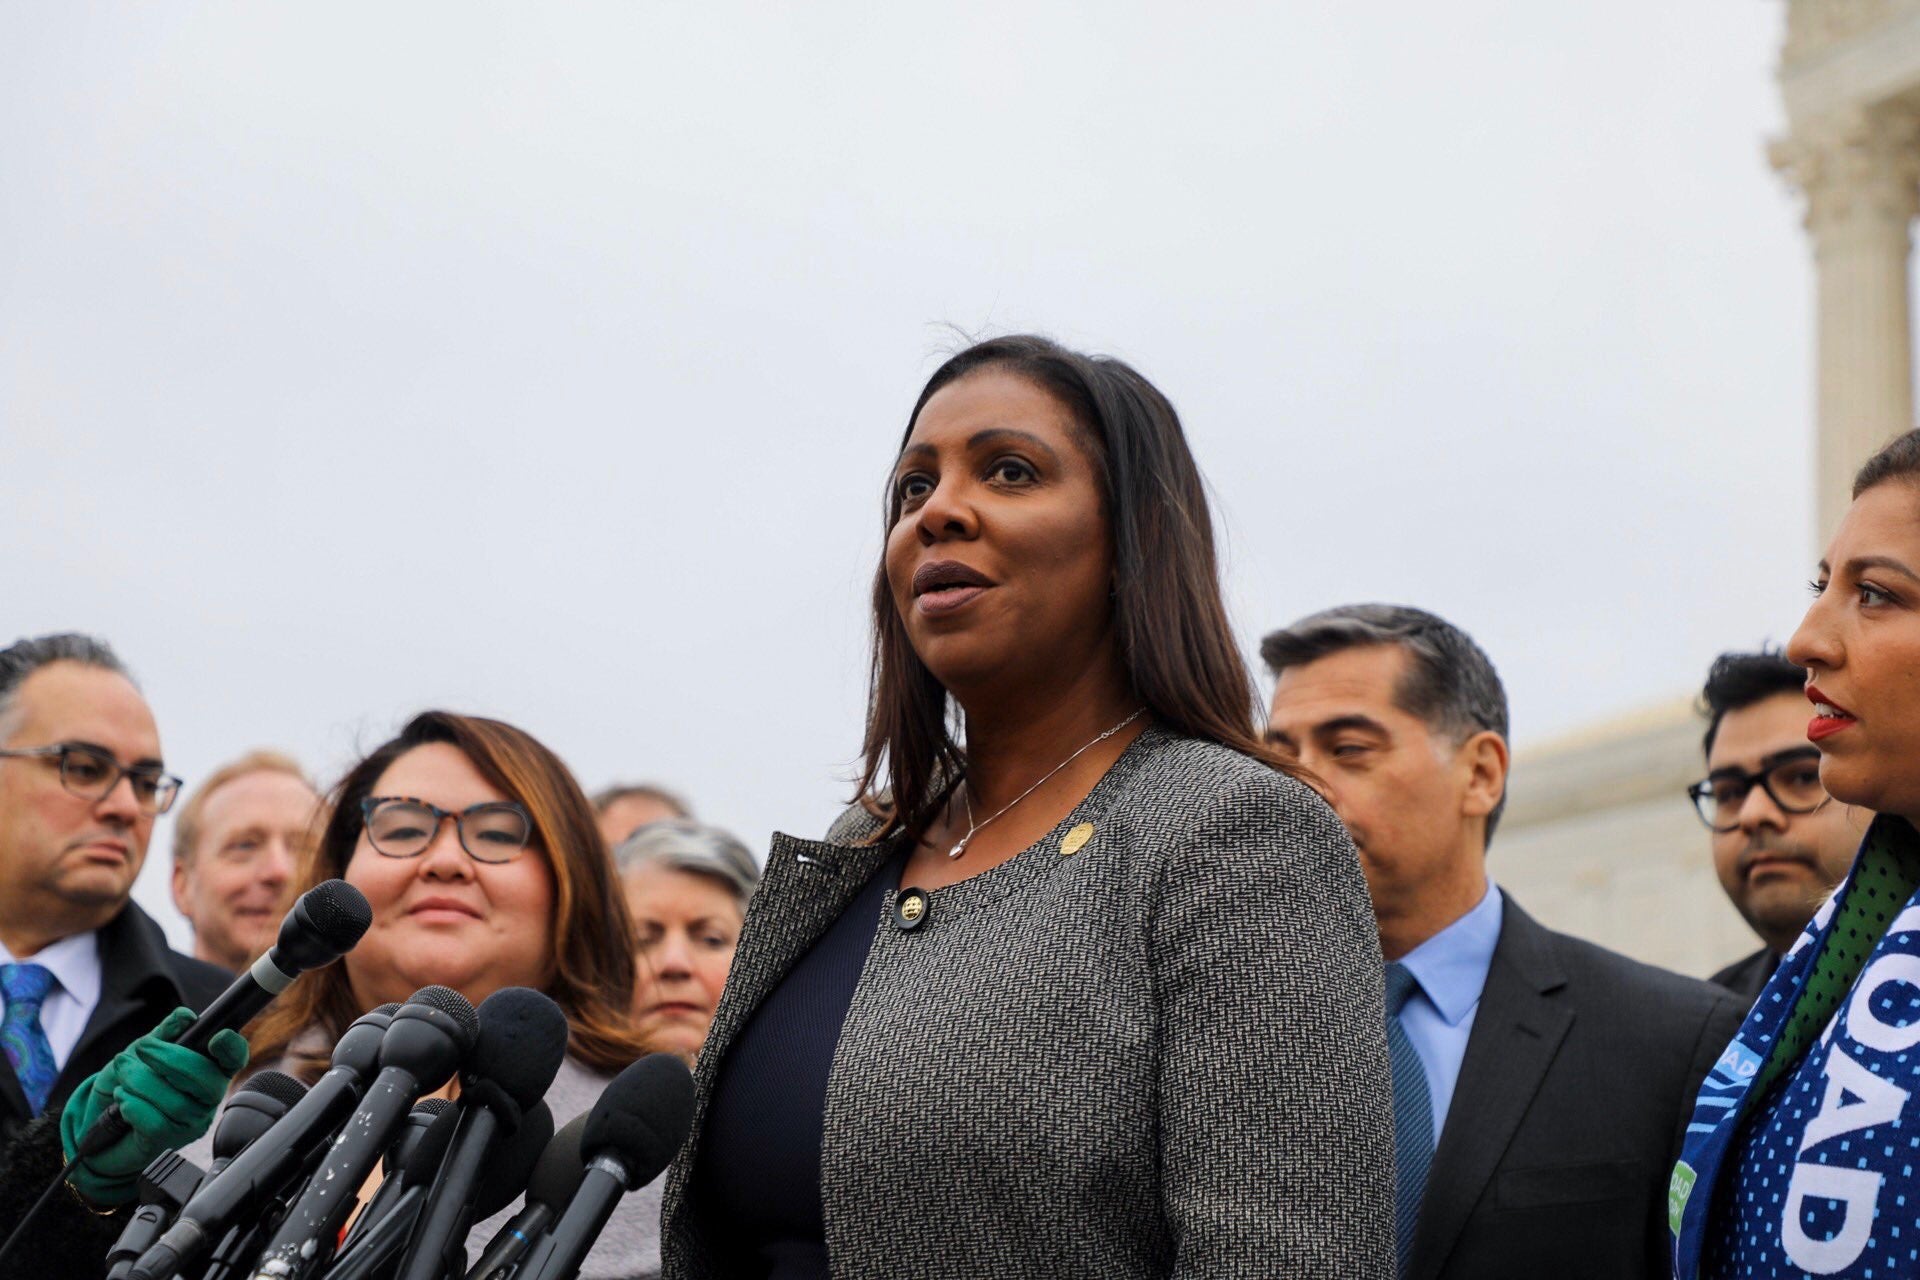 New York Attorney General Letitia James Is Still The 'People's Lawyer'